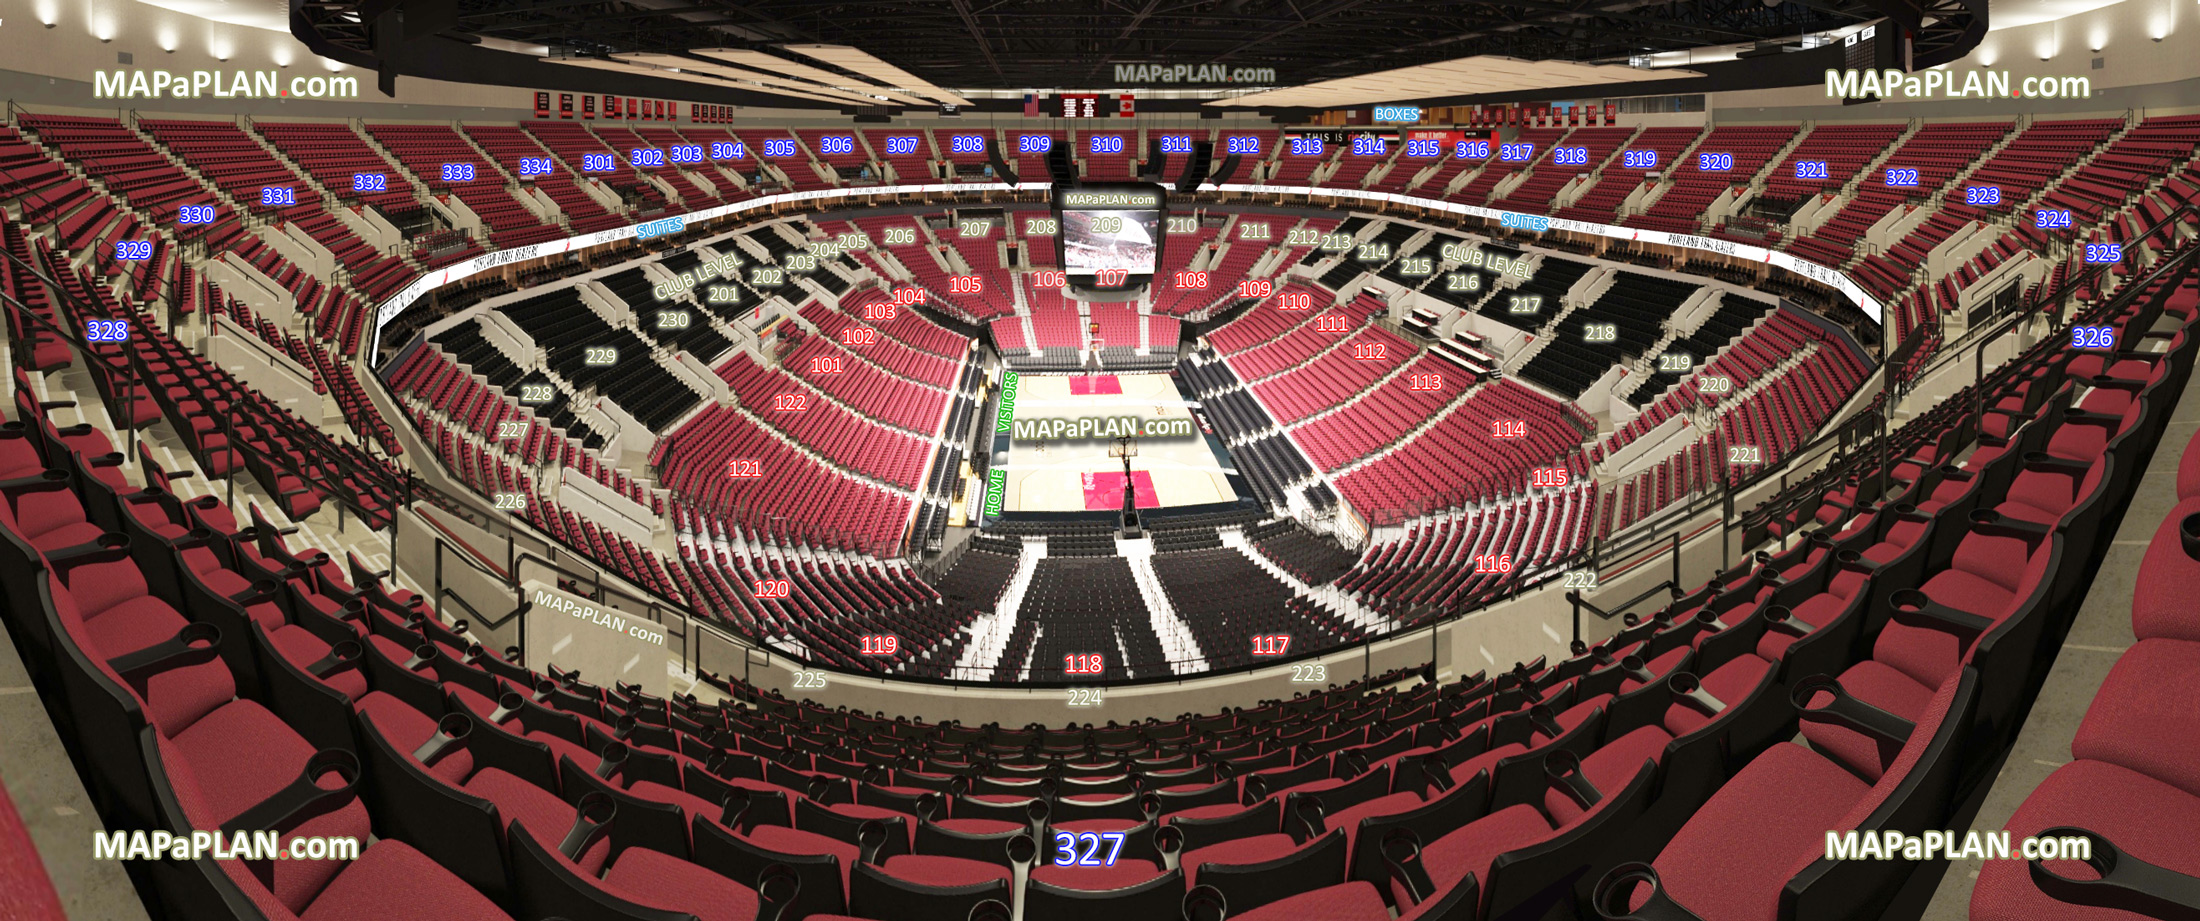 view section 327 row o seat 10 trail blazers ncaa college basketball tournament home visitors bench court sideline baseline corner floor courtside club seats Portland Moda Center seating chart